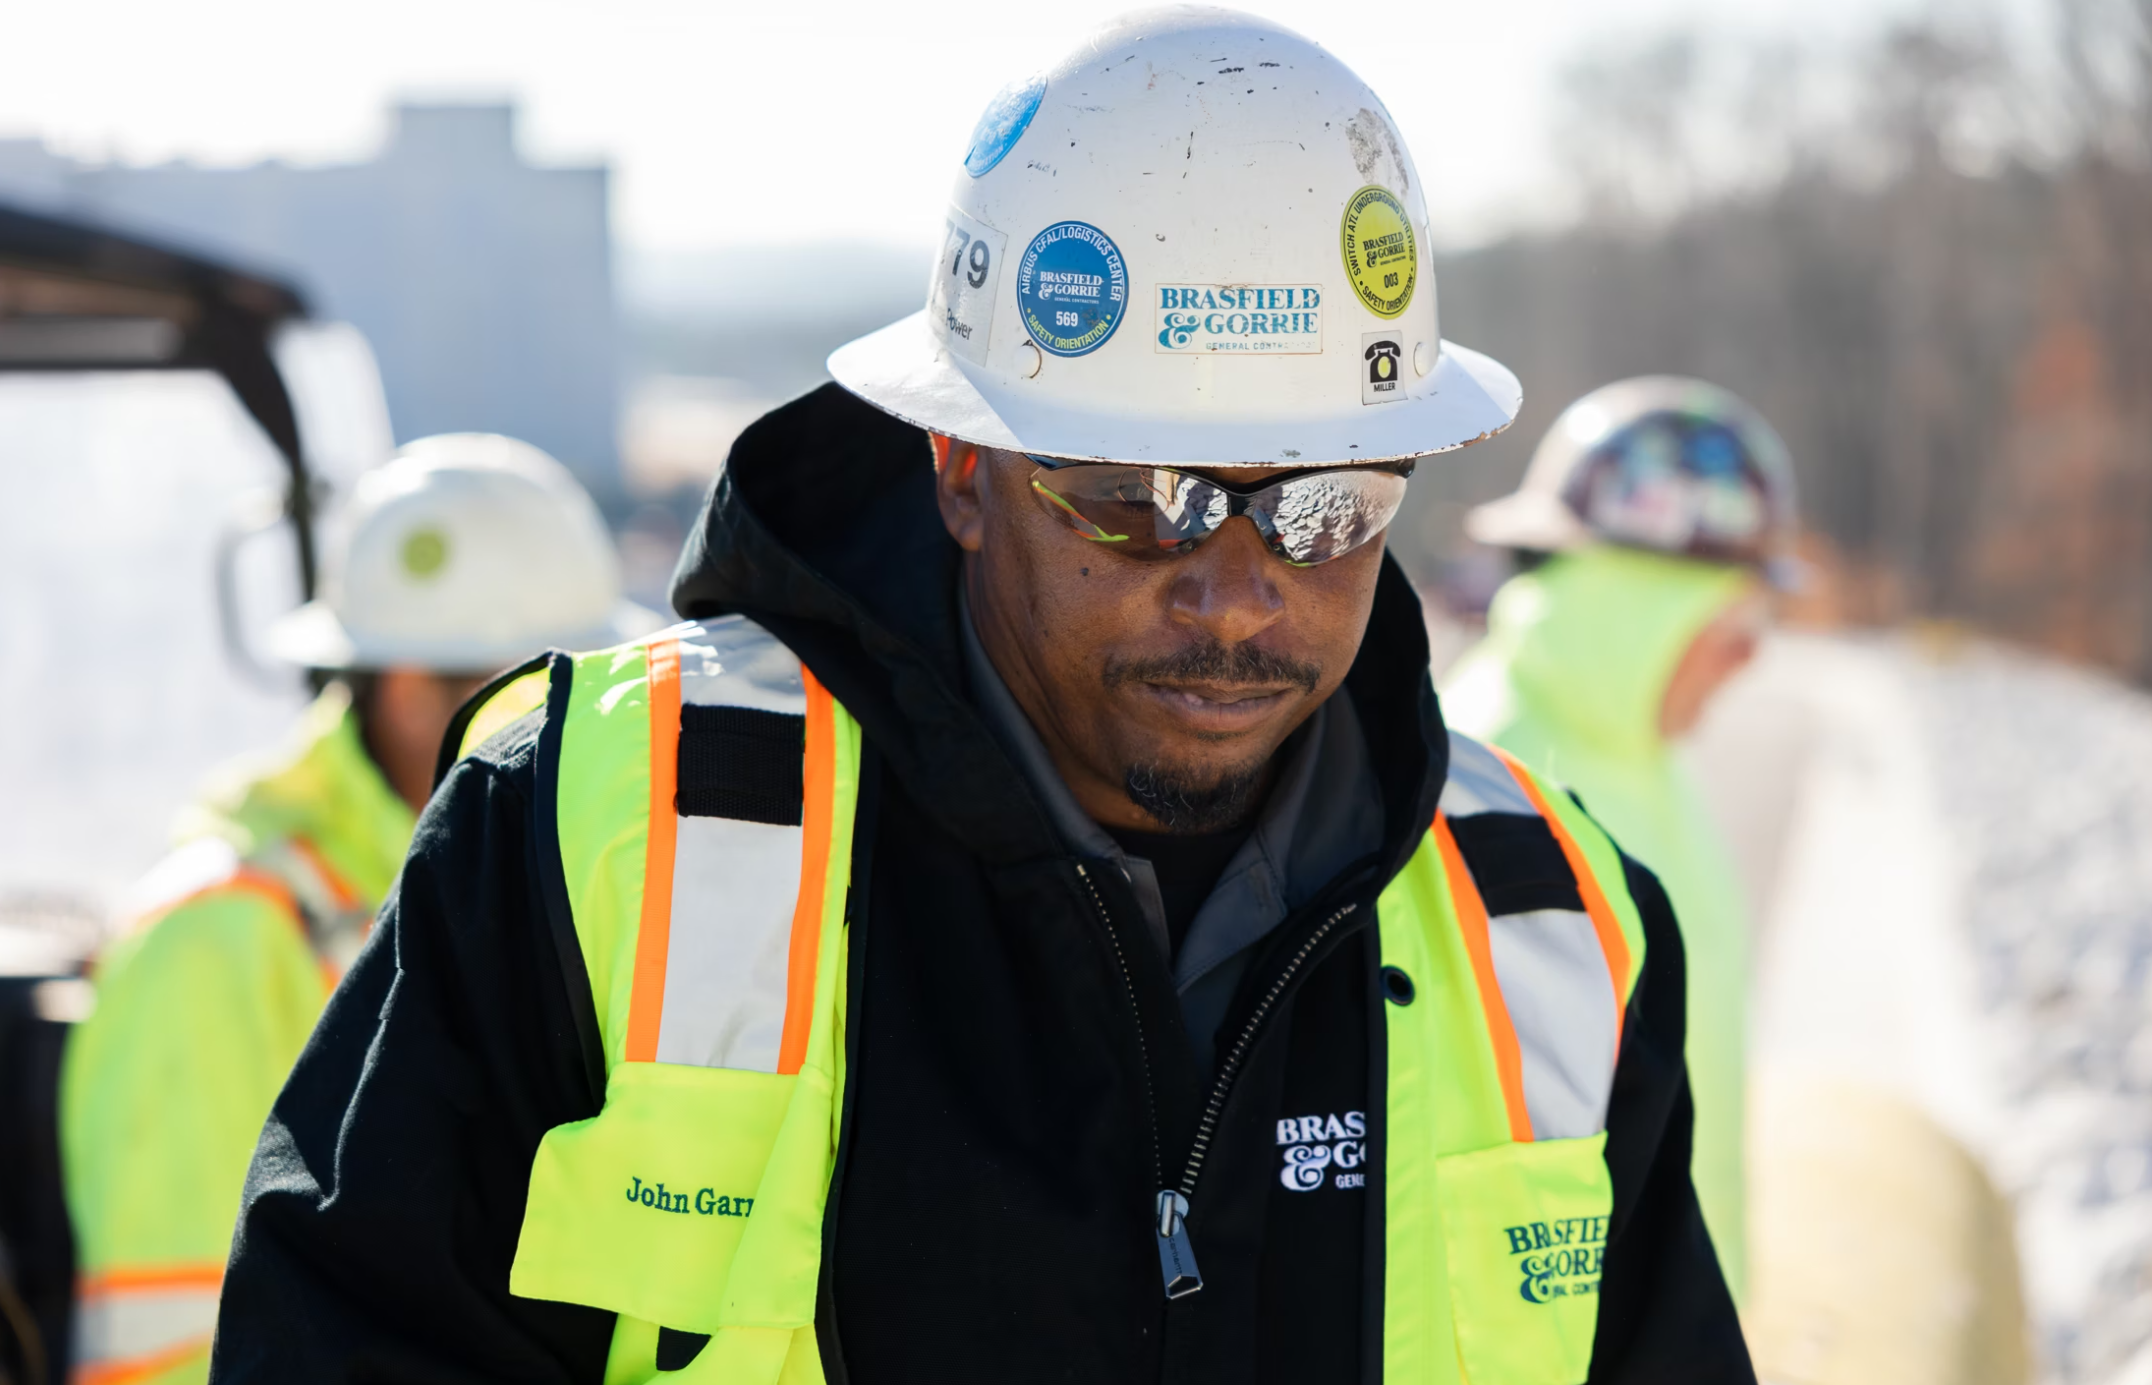 Construction worker in safety gear at a work site, focusing on career development.